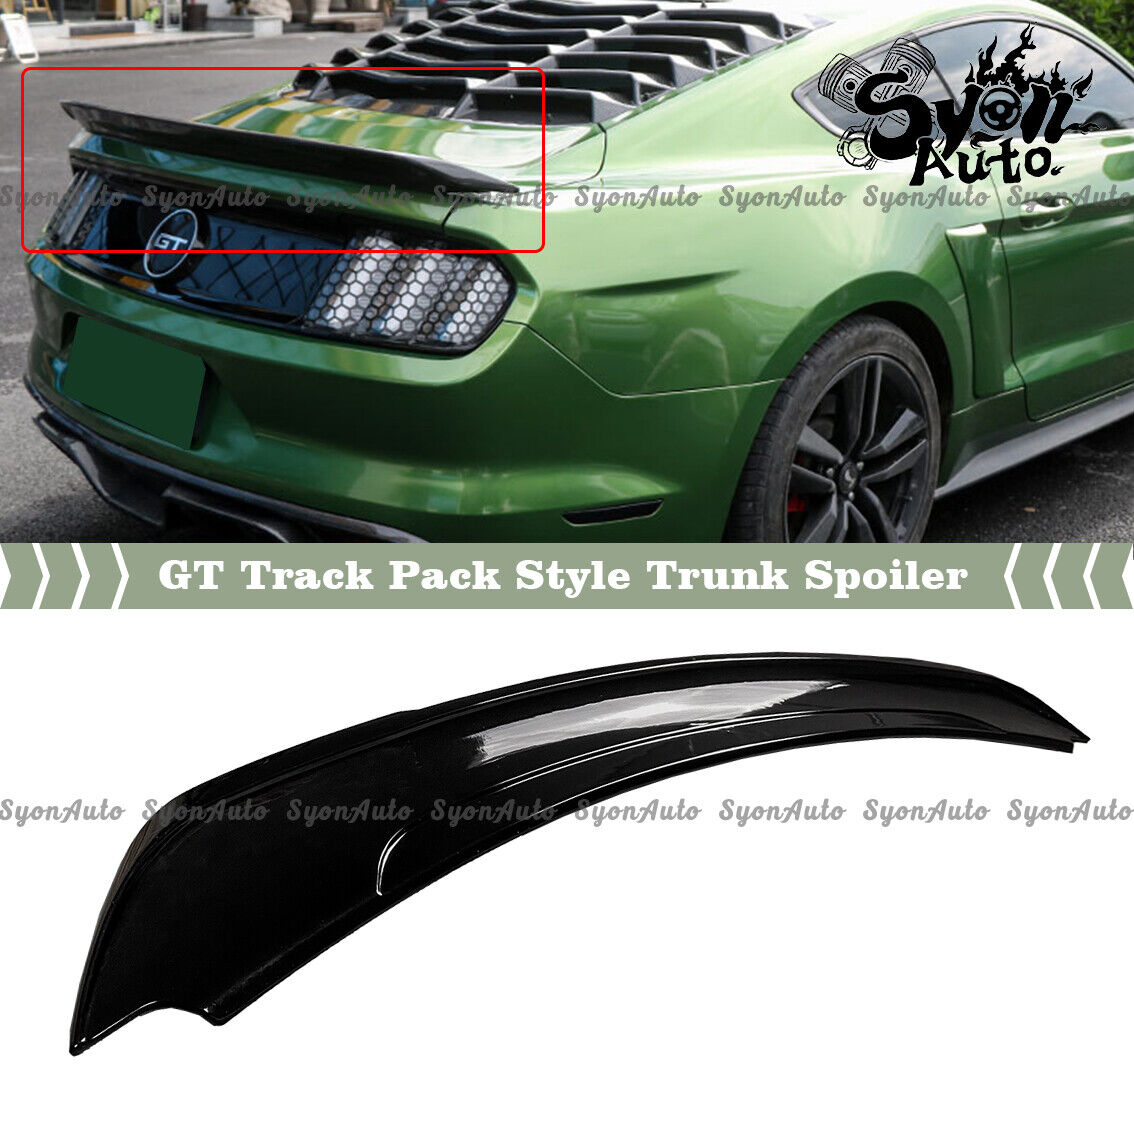 FITS 2015-2021 FORD MUSTANG GLOSSY BLACK TRACK PACK GT STYLE TRUNK SPOILER WING